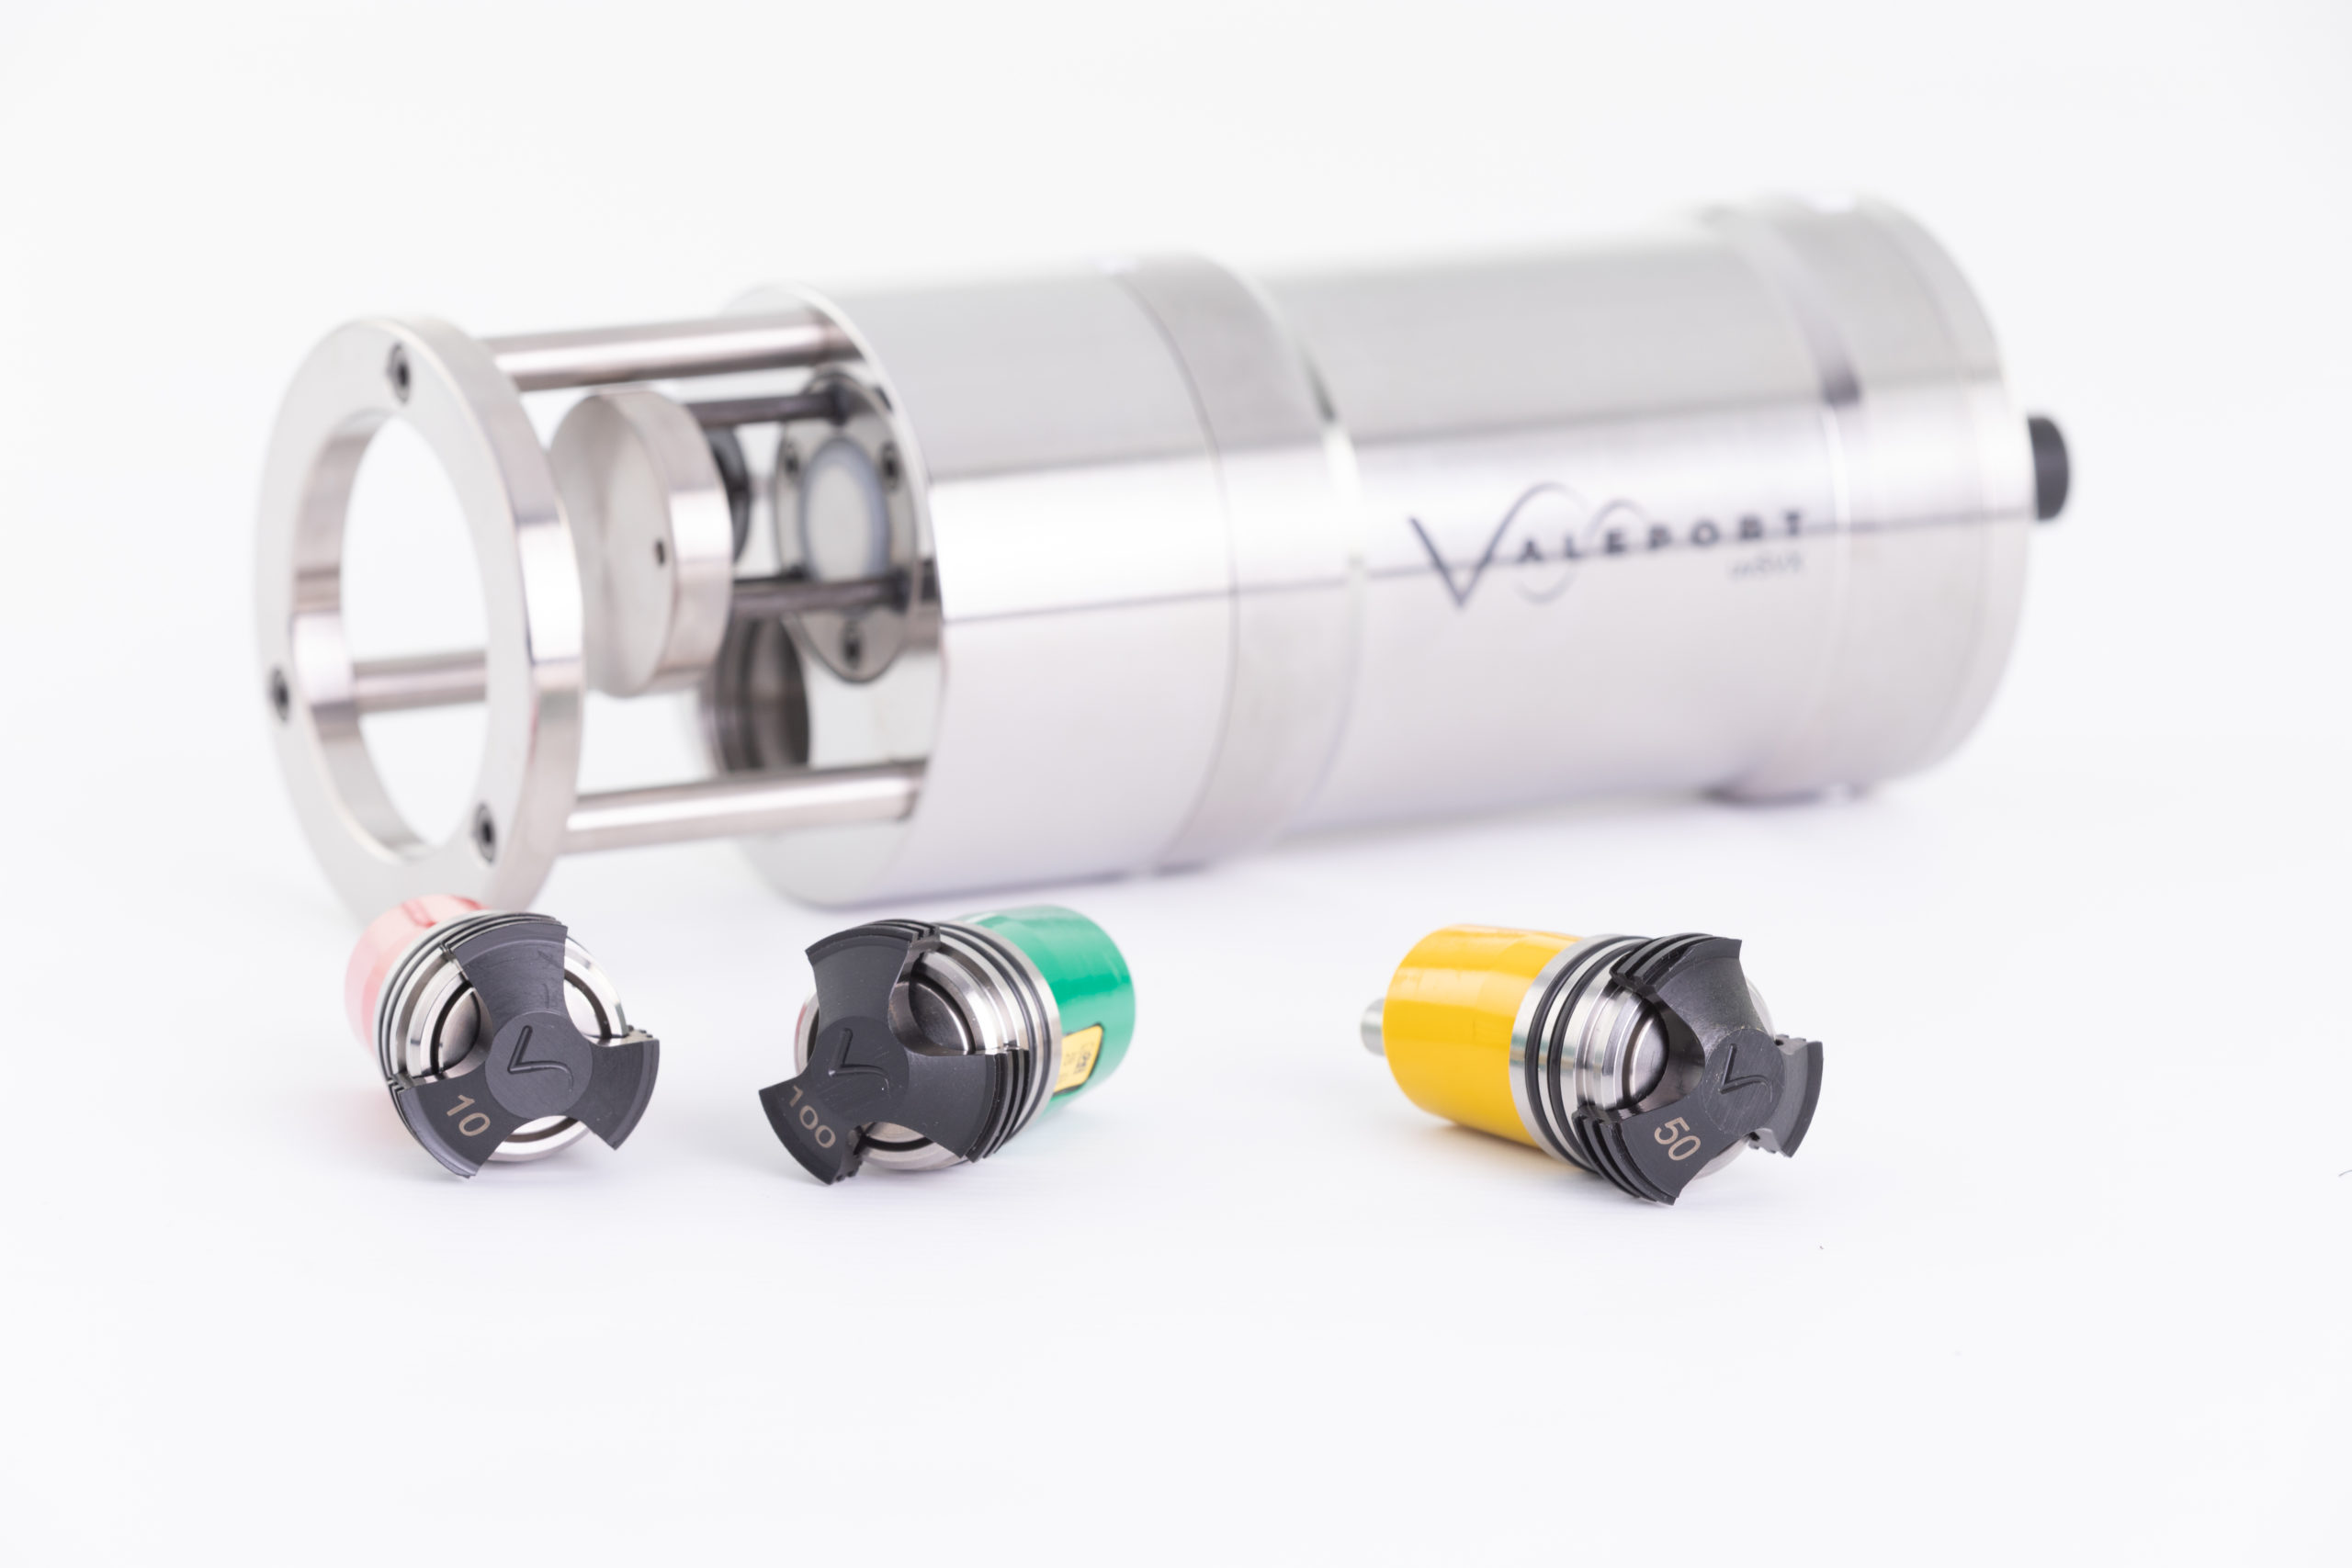 2 Valeport uvSVX with Interchangeable Pressure Sensors on white background